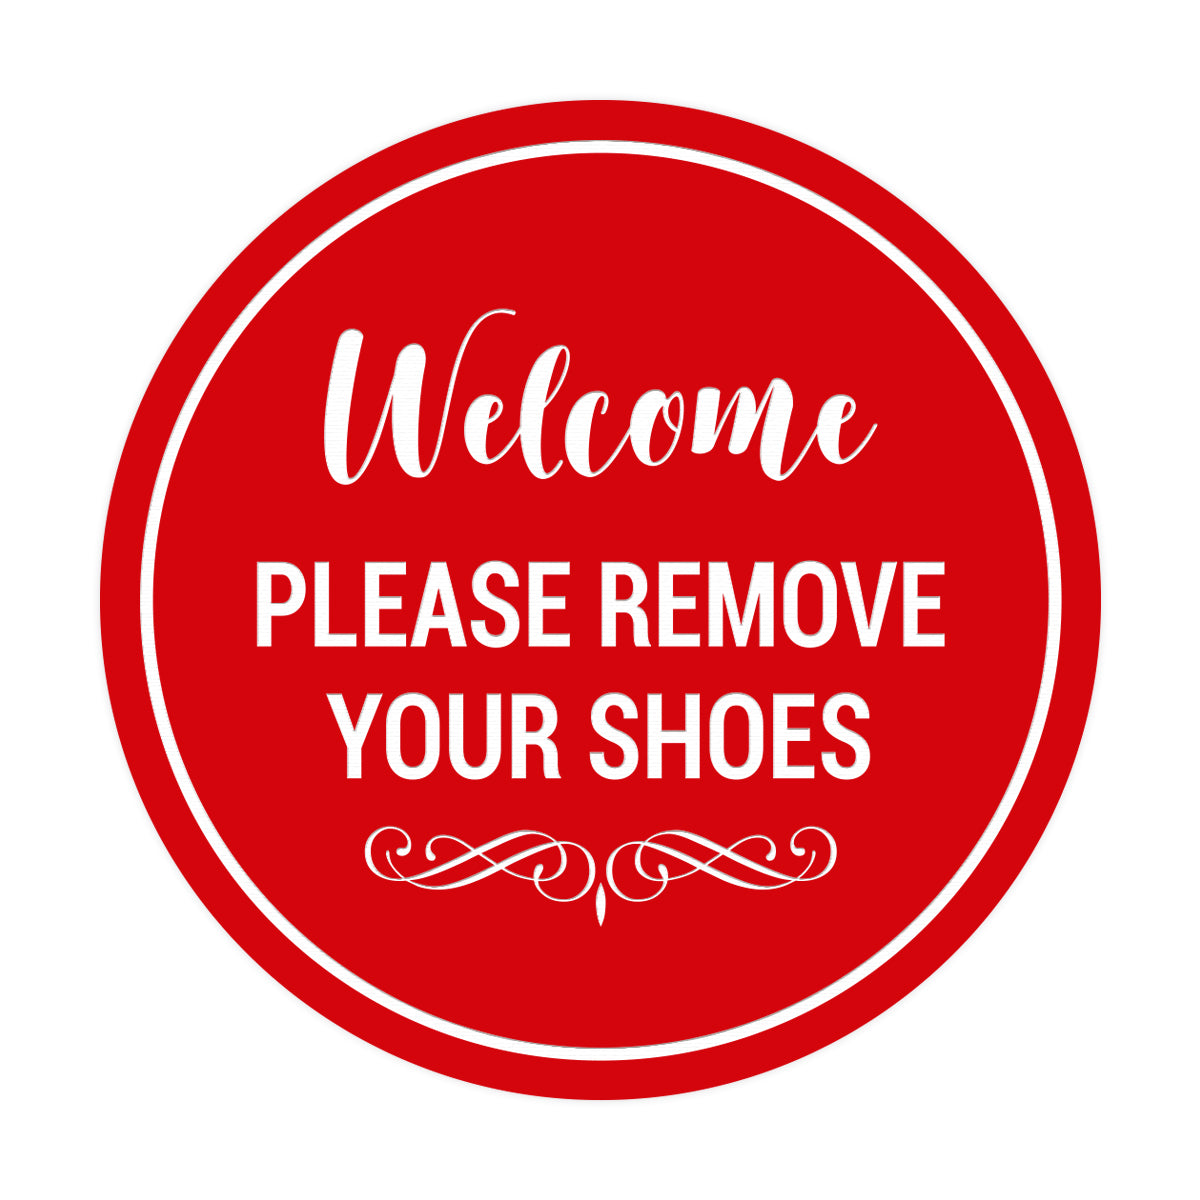 PLEASE REMOVE YOUR SHOES SIGN BOARD 110X220MM MATERIAL: PVC FOAM BOARD 3MM  | Lazada